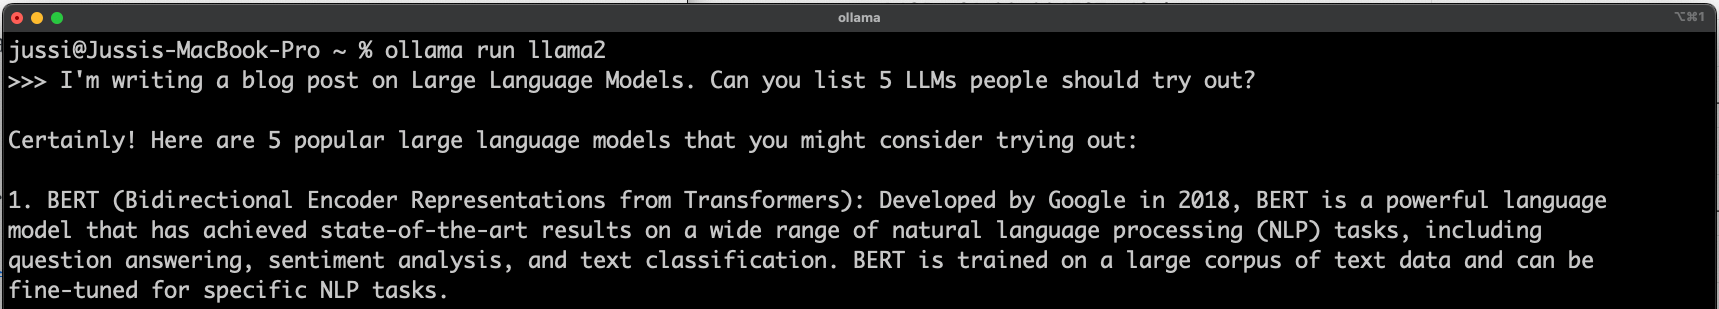 Getting started with Ollama with Microsoft's Phi-2